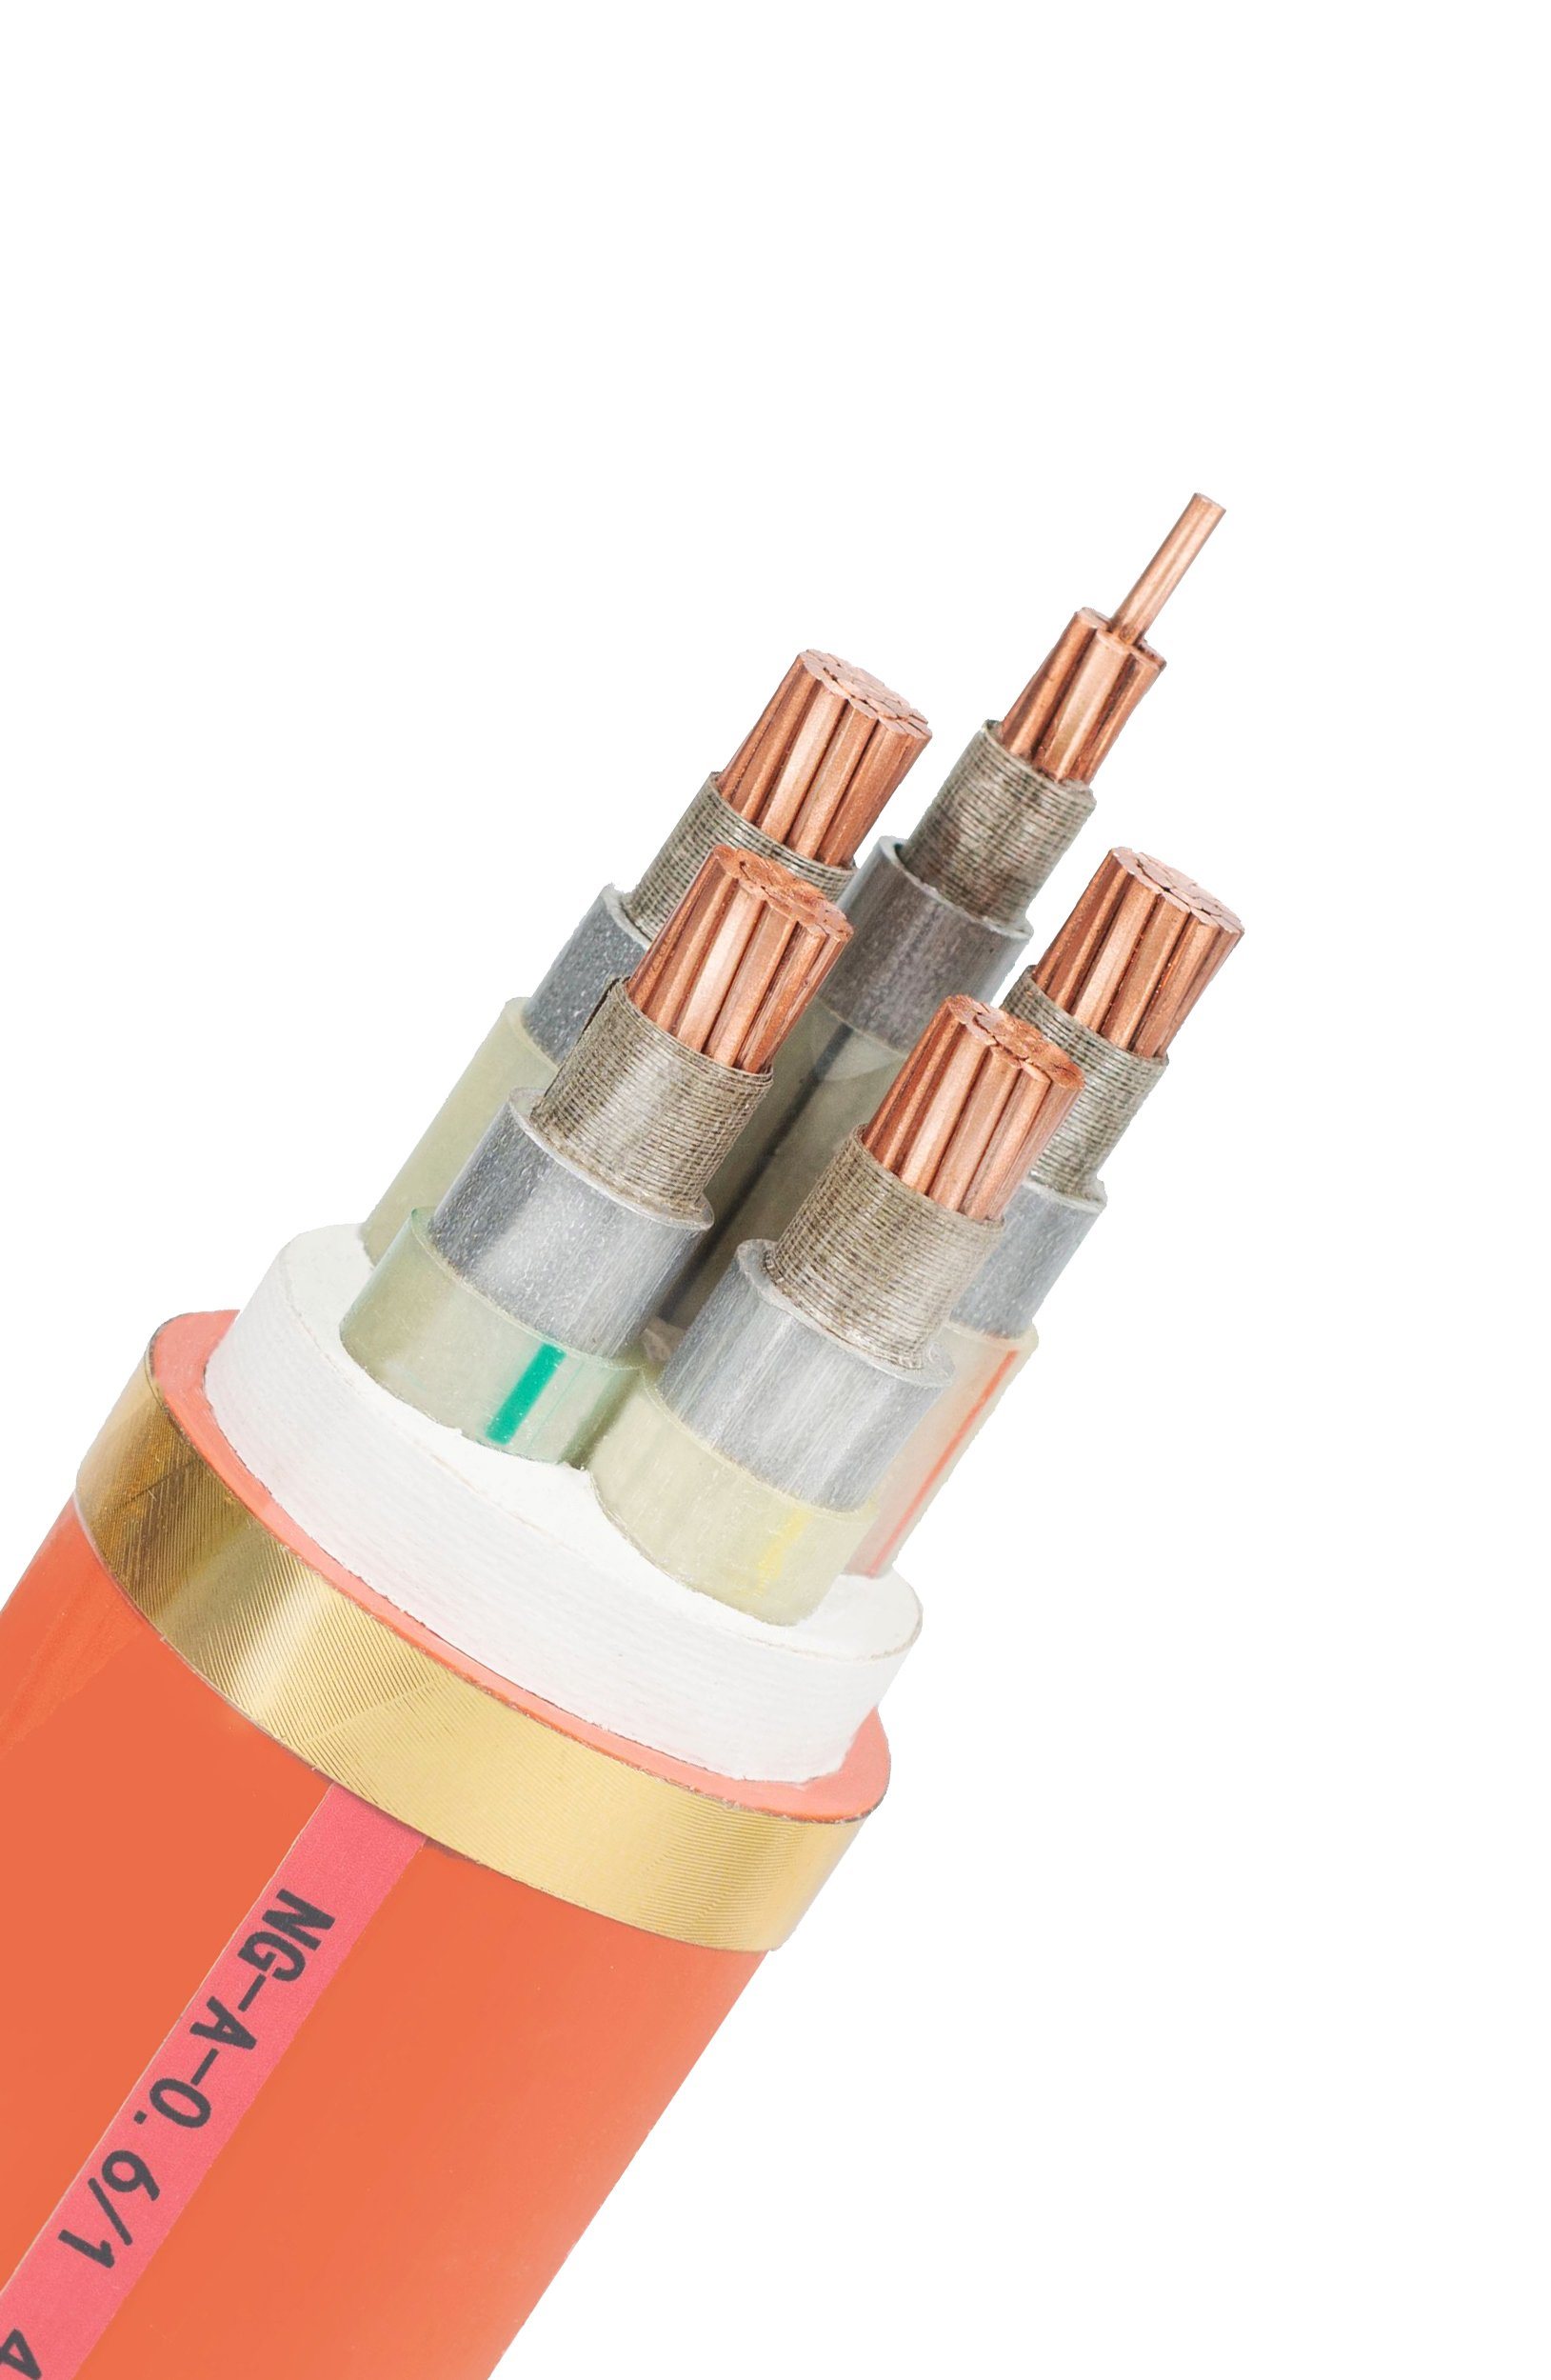 Low/Medium/High Voltage Al/Cu Conductor Lsoh/LSZH Sheathed Cable Single/Multi Cores Sta/Swa Cross-Linked XLPE Insulated Cable